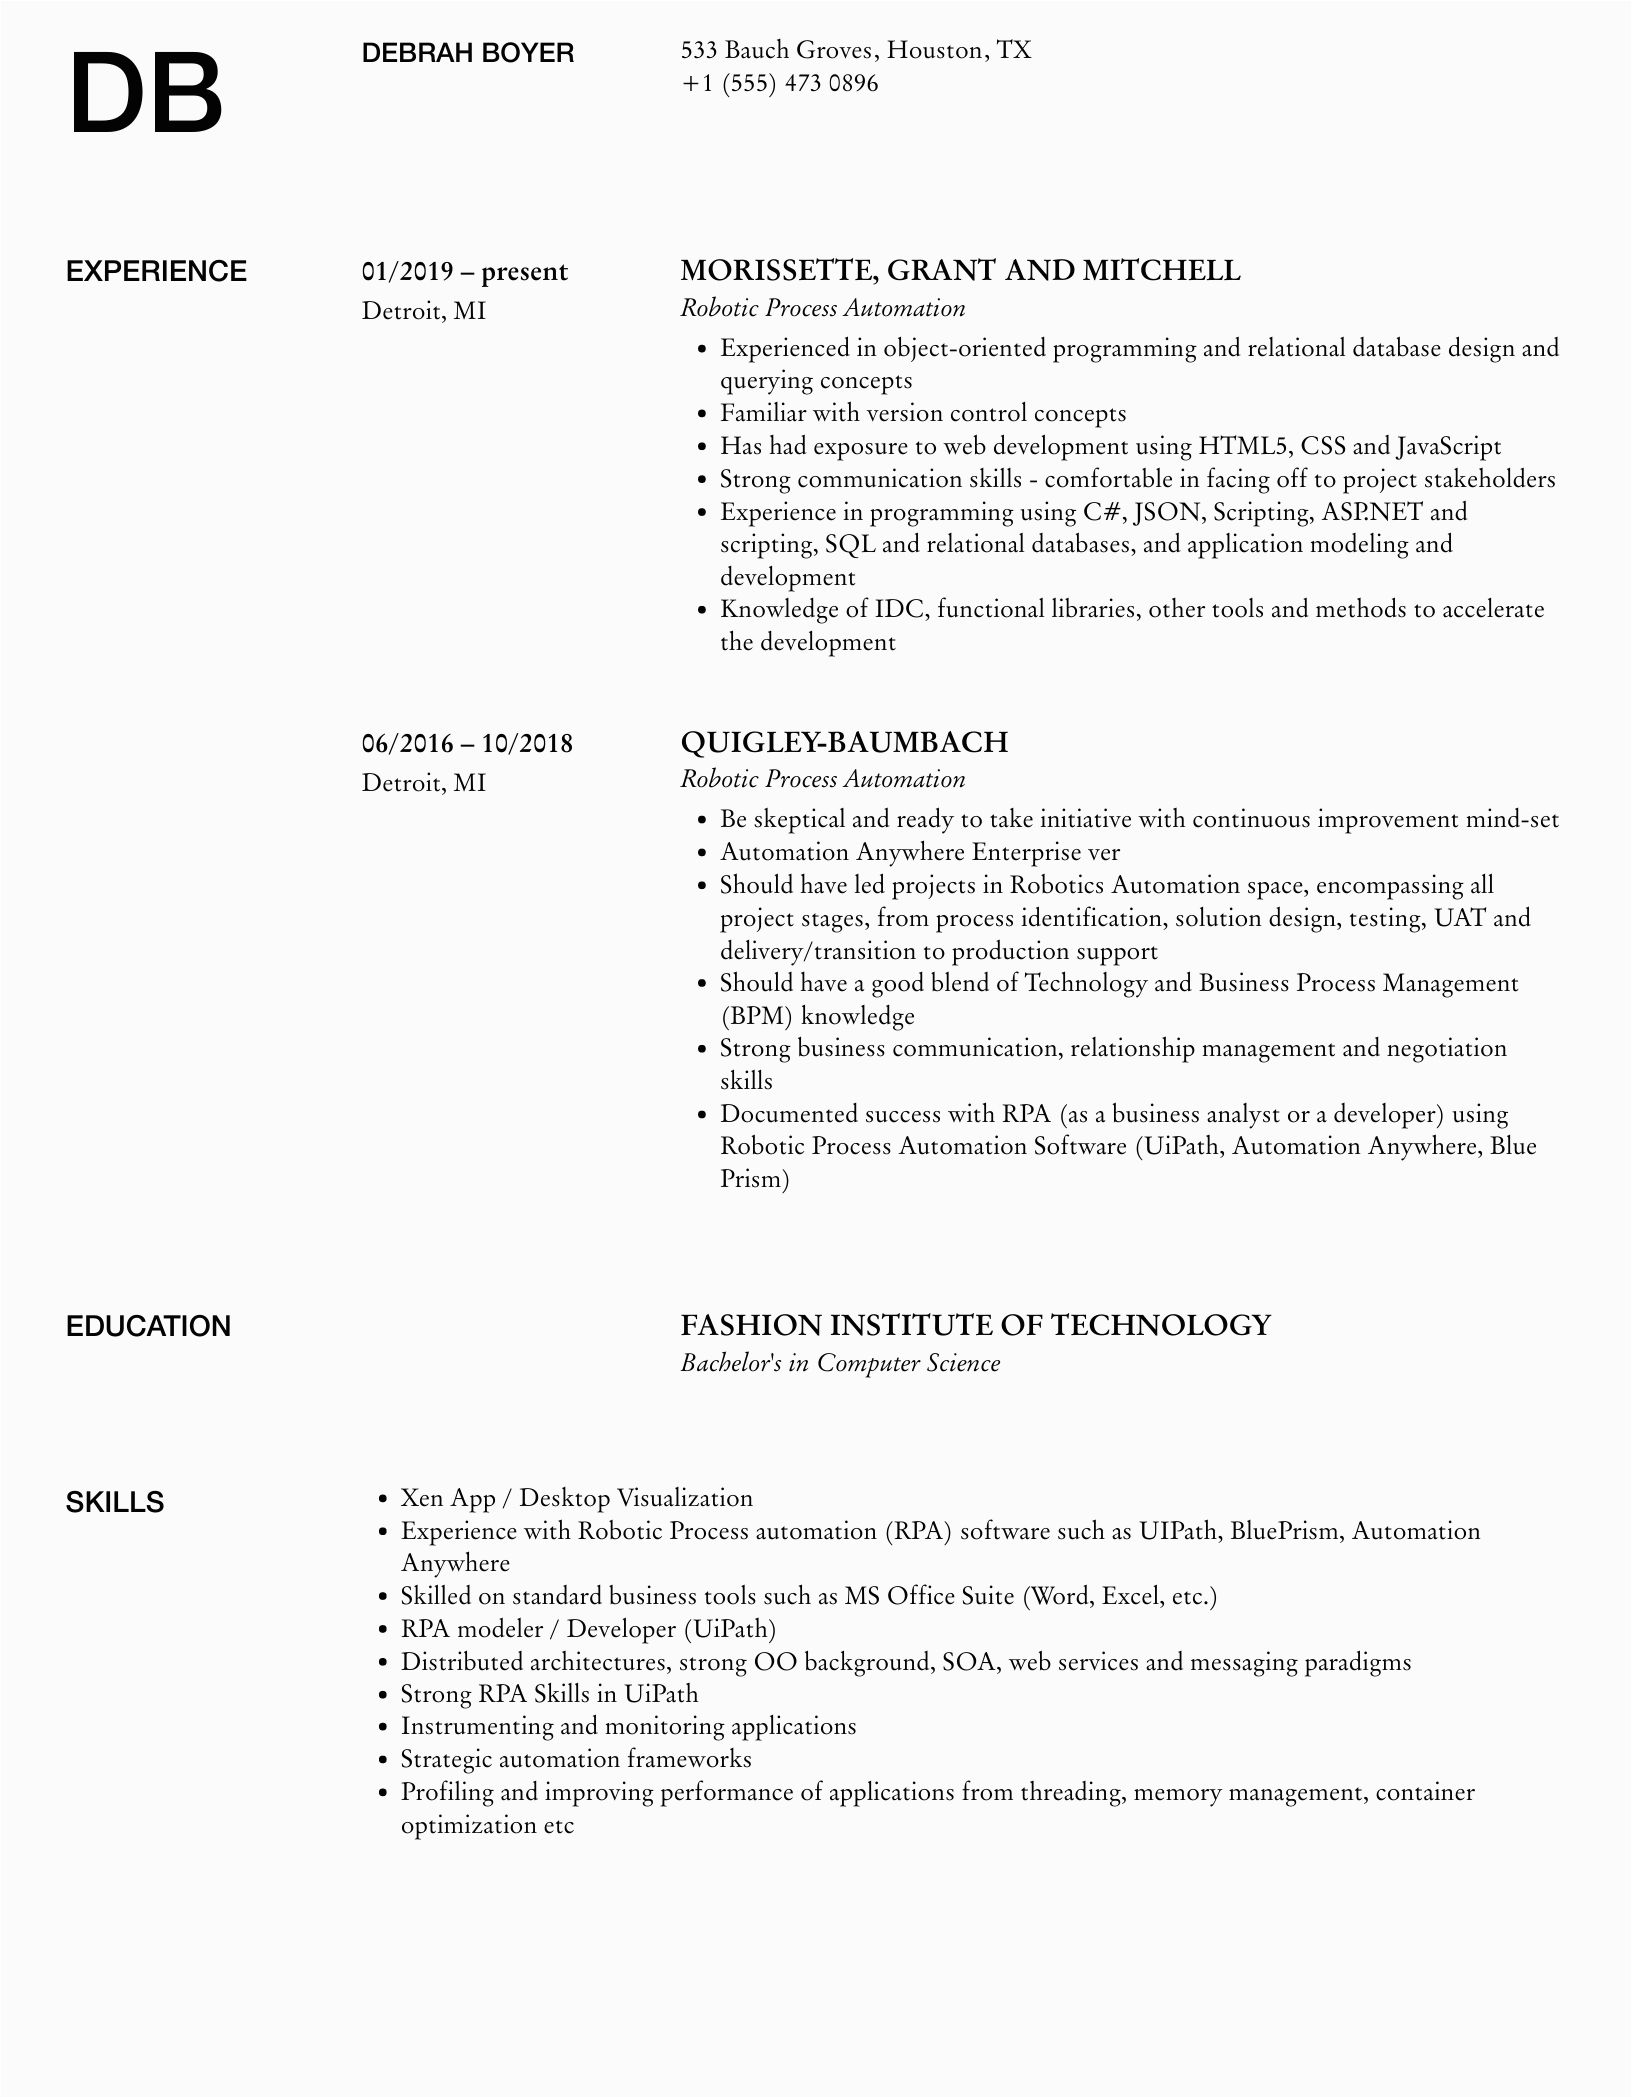 Sample Resume for Robotic Process Automation Robotic Process Automation Resume Samples